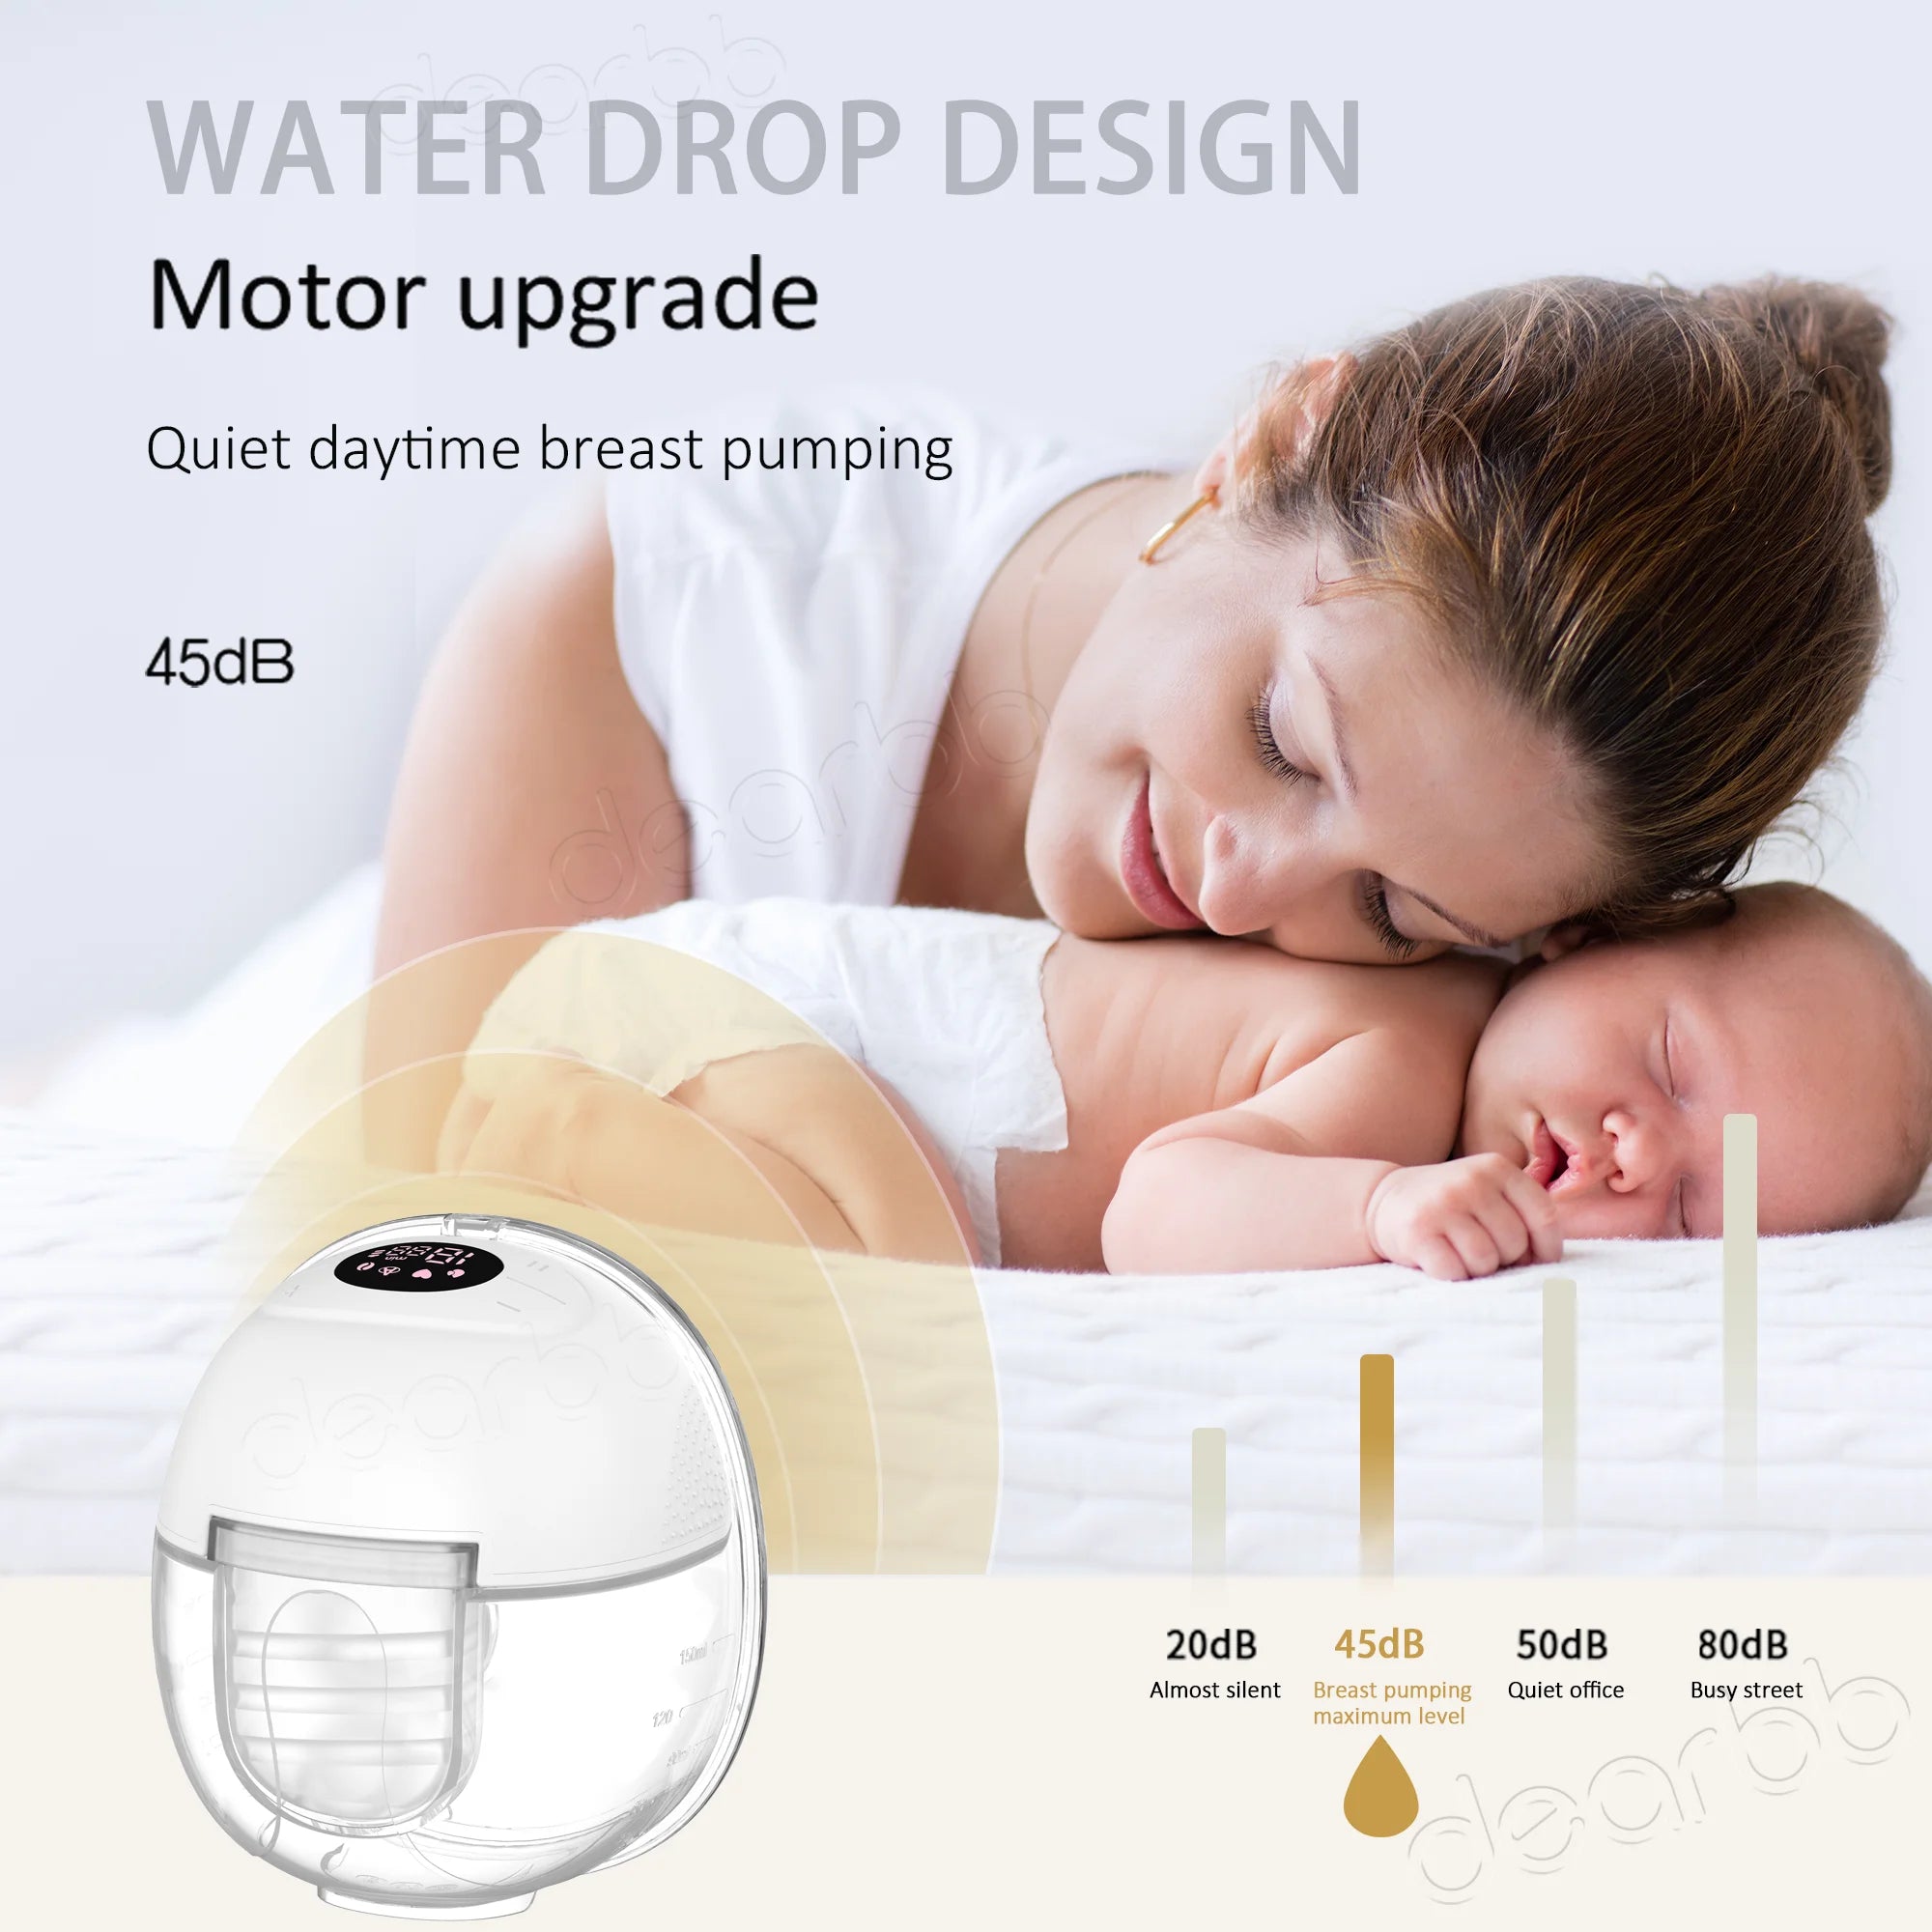 Golden Meadow GM2 - The All **New** Revolutionary Wearable Breast Pump - Single Pump